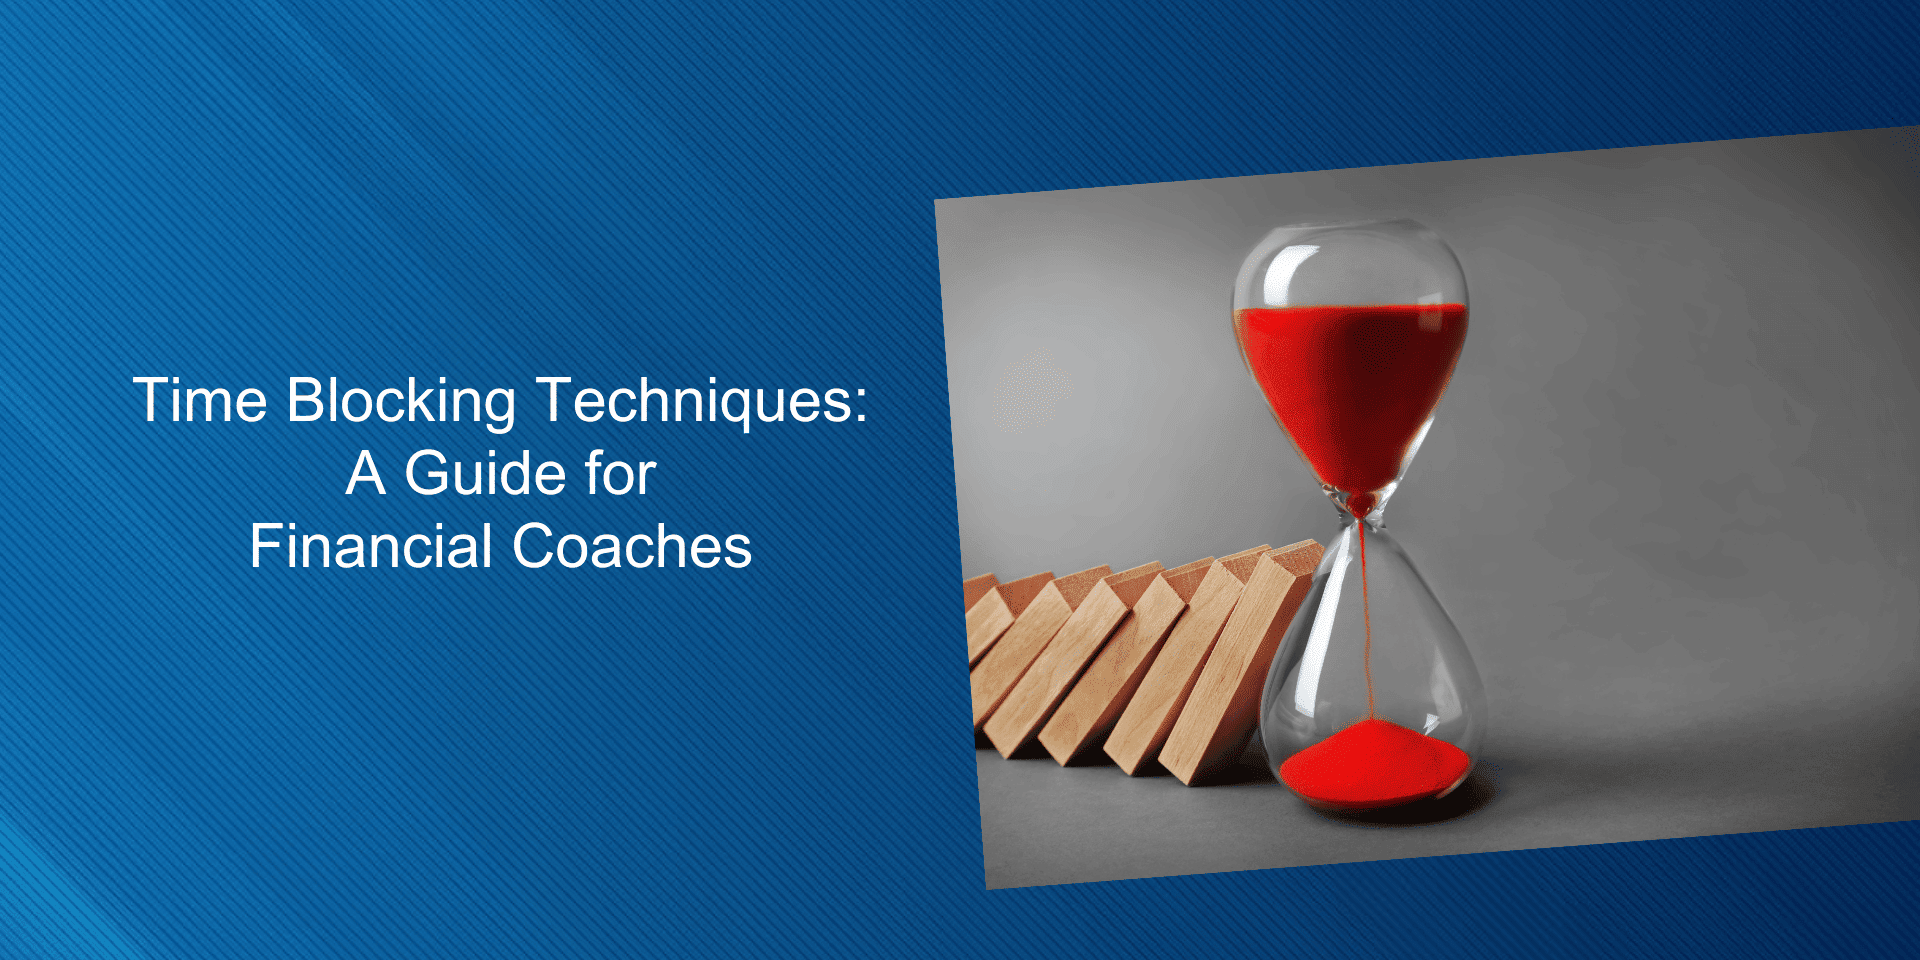 Time Blocking Techniques: A Guide for Financial Coaches